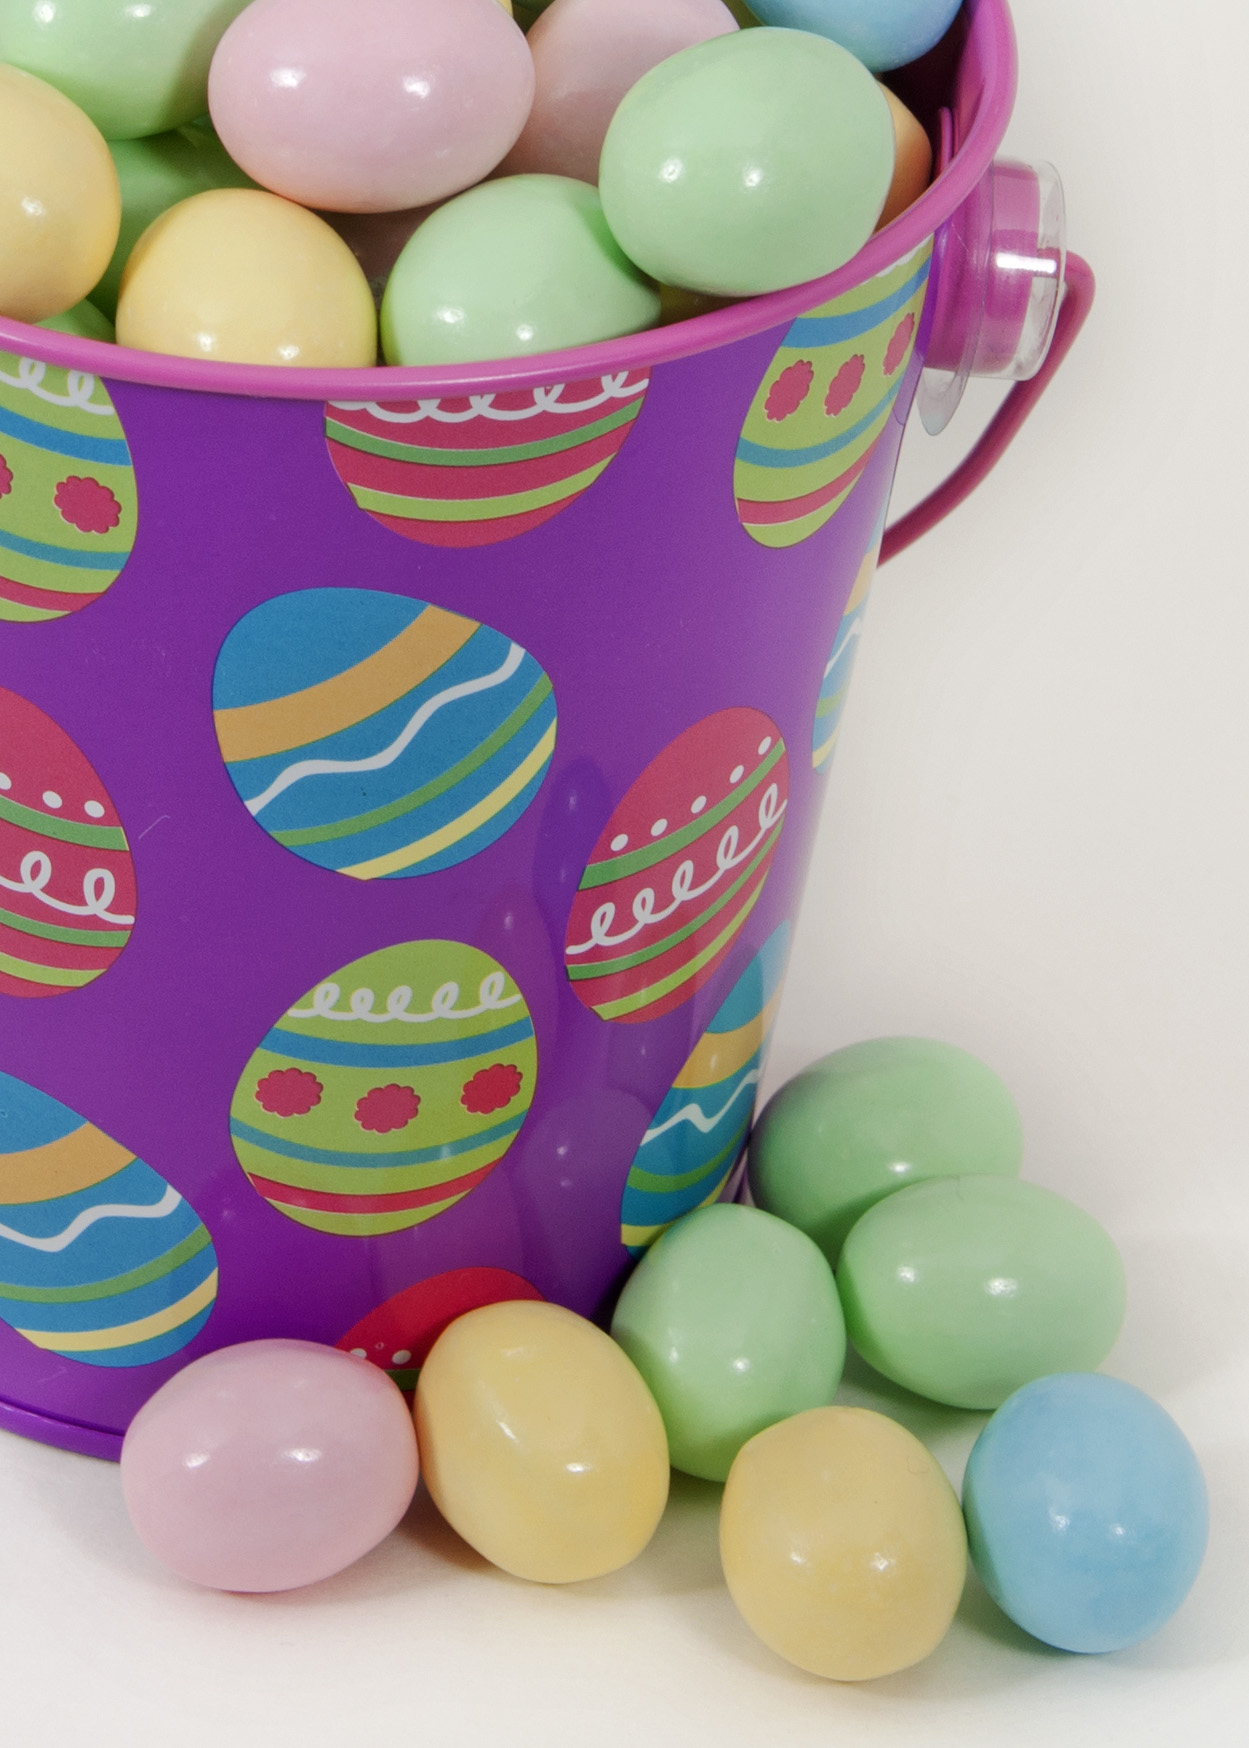 Bucket of Eggs, Bucket, Candy, Colorful, Easter, HQ Photo